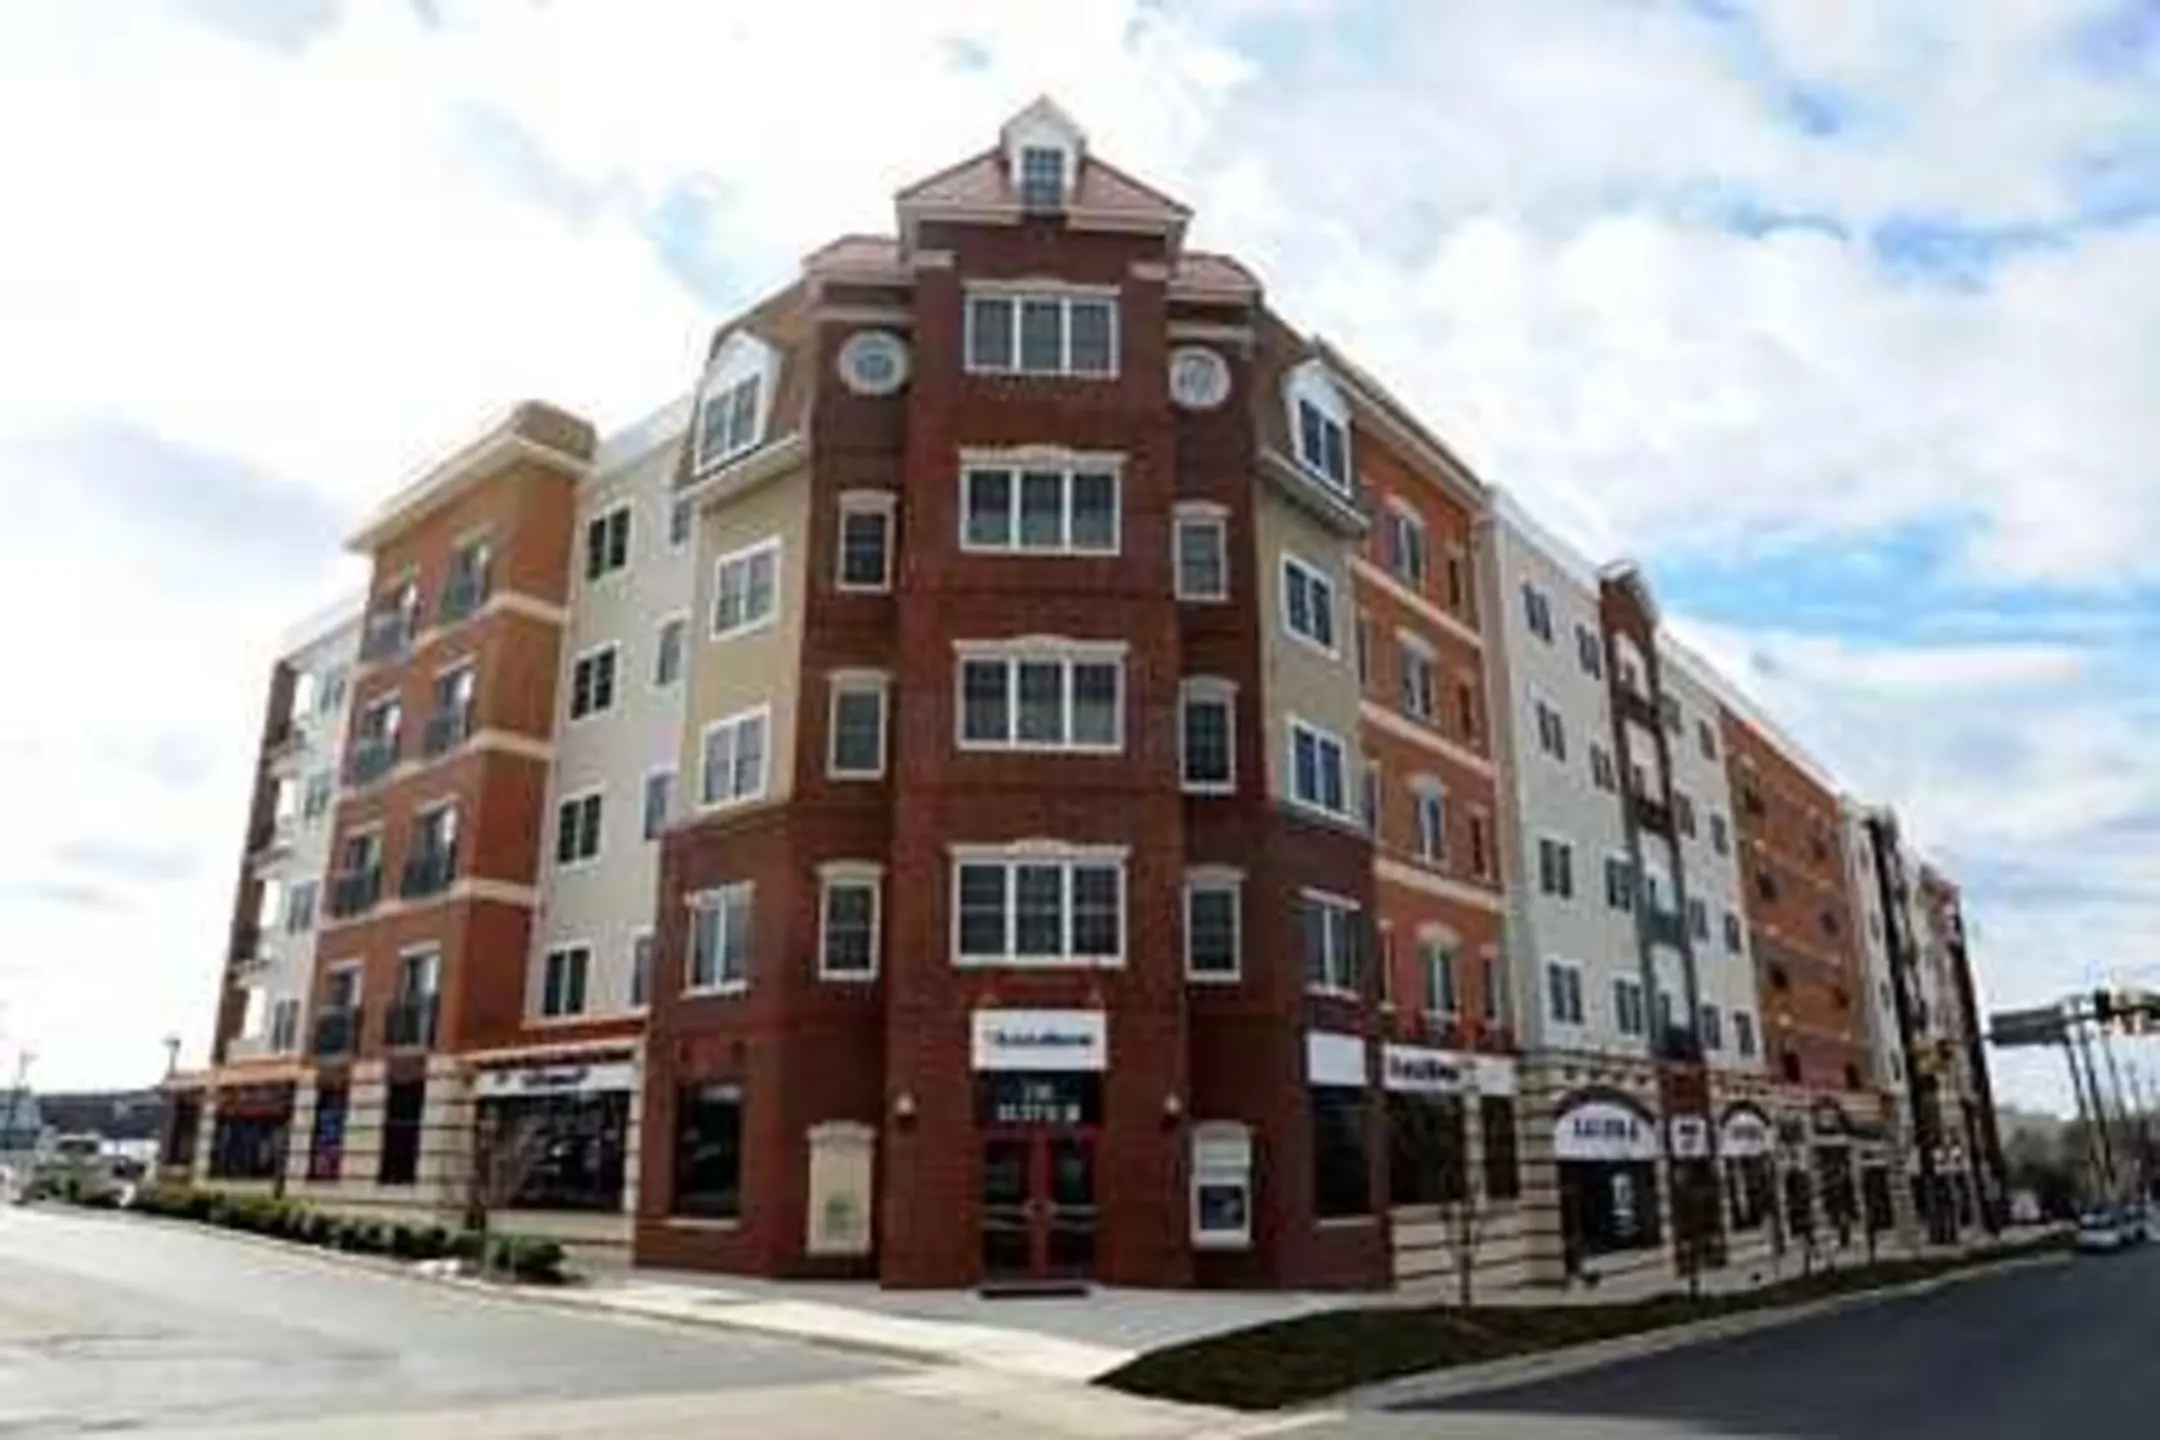 Building - The Residences at Rollins Ridge - Rockville, MD